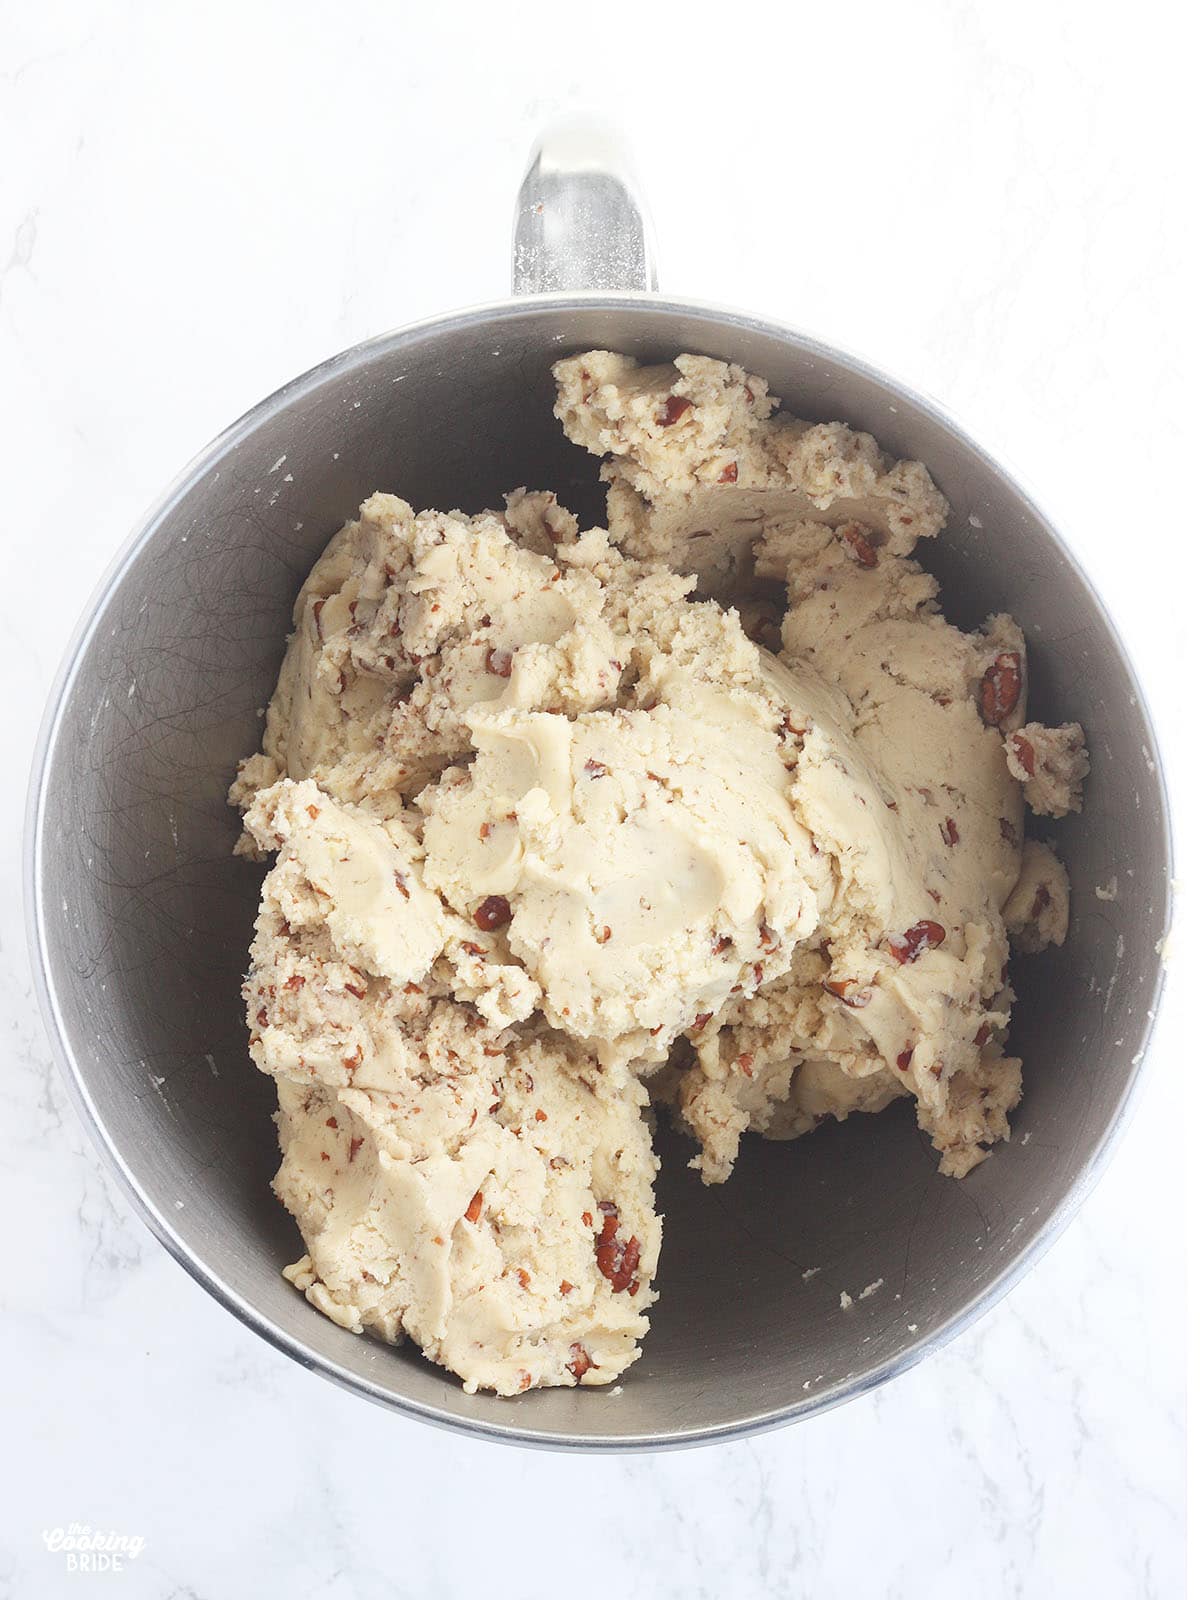 mixed cookie dough with pecans in a metal mixing bowl